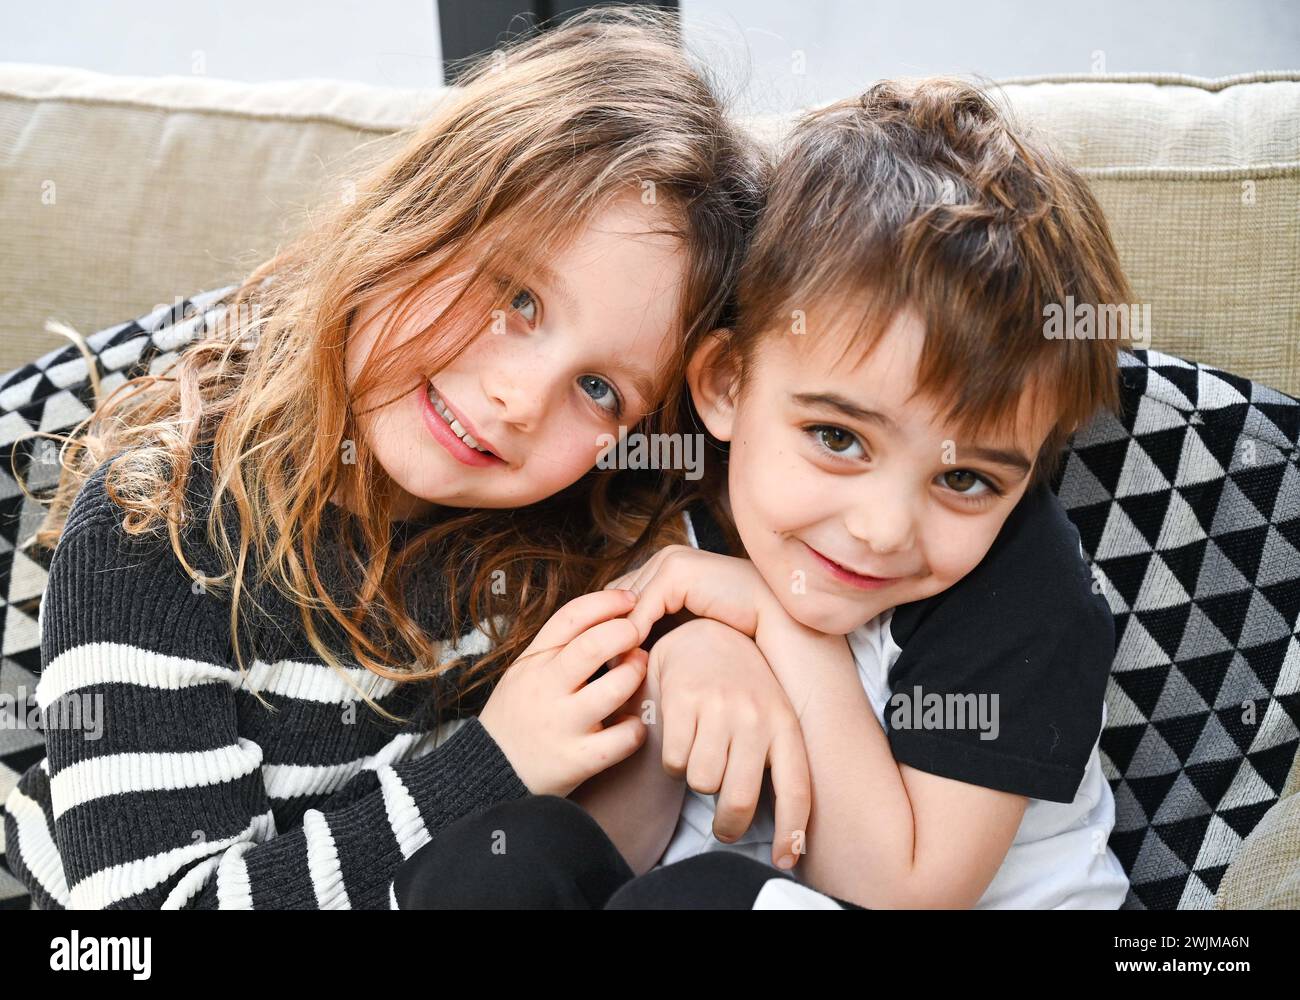 Loving seven year old girl with her four year old brother Stock Photo